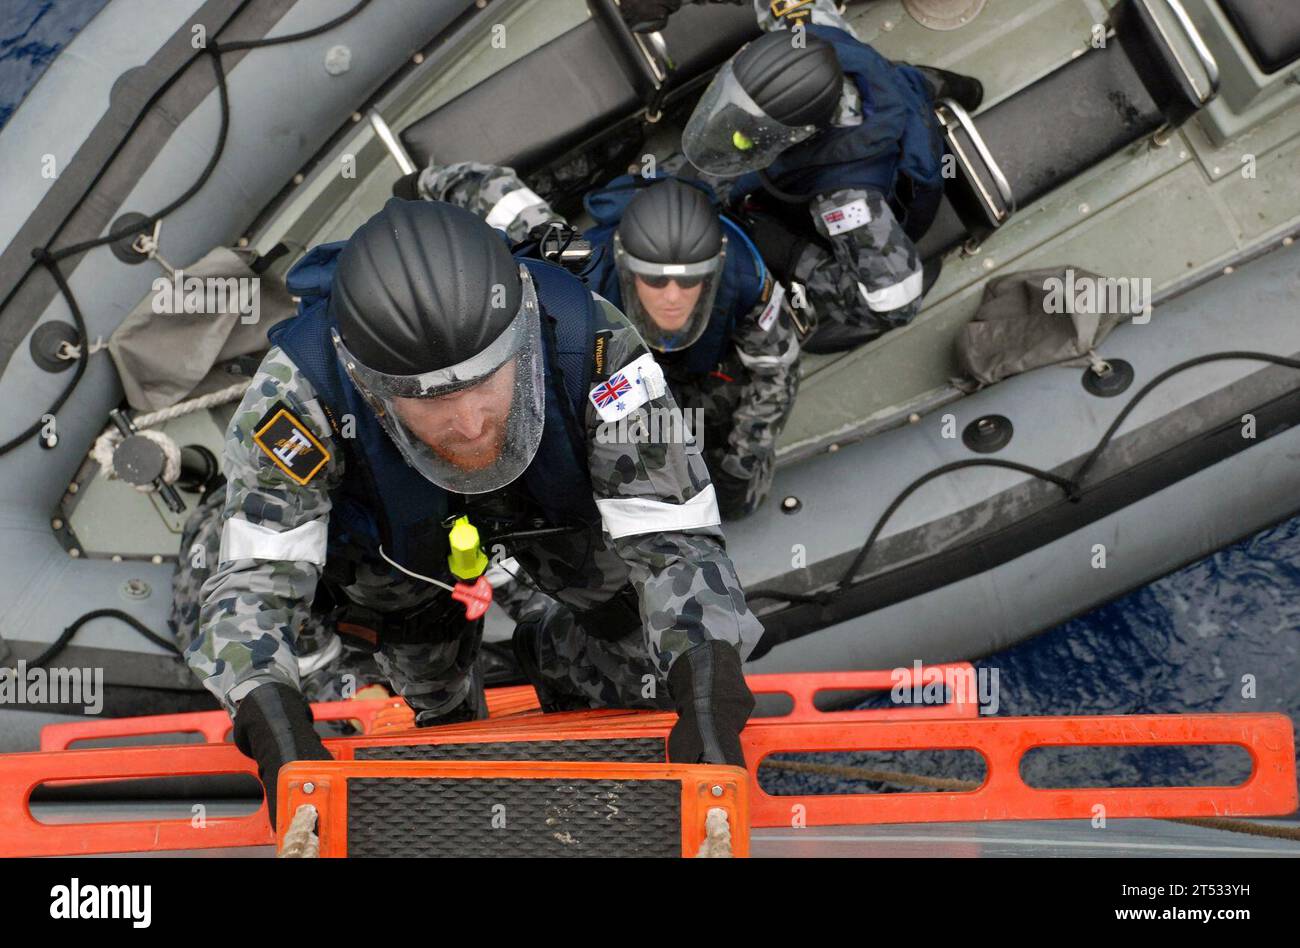 0910297095C-048 SOUTH CHINA SEA (Oct. 29, 2009) Members of an Australian boarding team disembark a rigid-hull inflatable boat and climb aboard the Military Sealift Command fleet replenishment oiler USNS Walter S. Diehl (T-AO 193) during a Deep Sabre II training exercise. Deep Sabre is a multi-national maritime interdiction exercise, with units from Brunei Darussalam, Canada, France, Japan, New Zealand, the Philippines, the Republic of Korea, Russia and Singapore as well as the U.S. and Australia. The U.S. Navy and U.S. Coast Guard units are embarked aboard the guided-missile destroyer USS Fitz Stock Photo